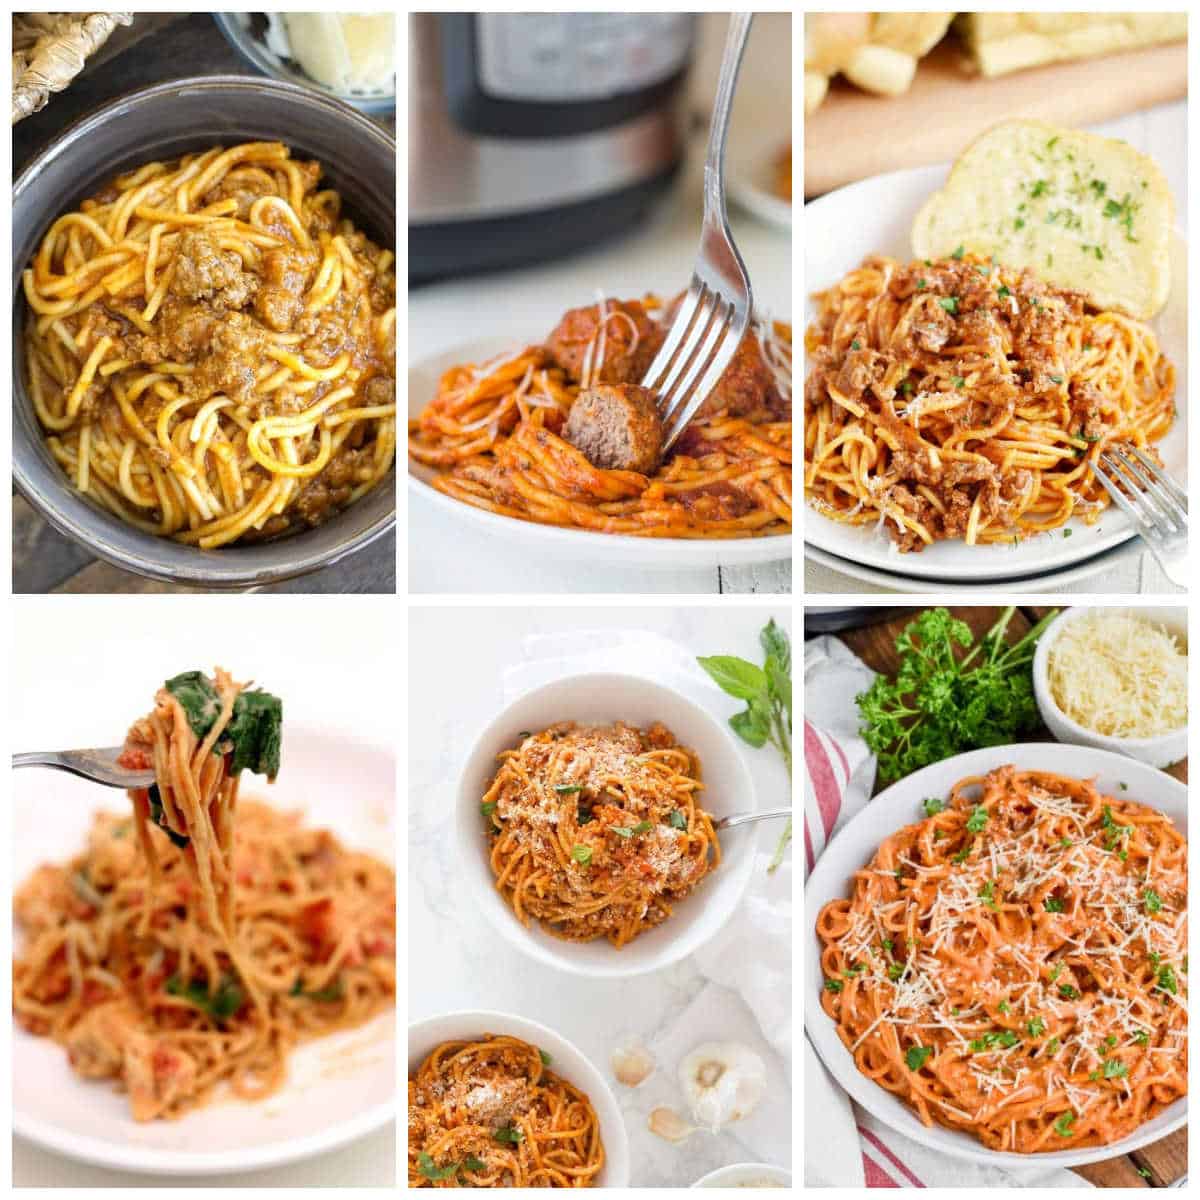 Easy Instant Pot Spaghetti Dinners collage of featured recipes.